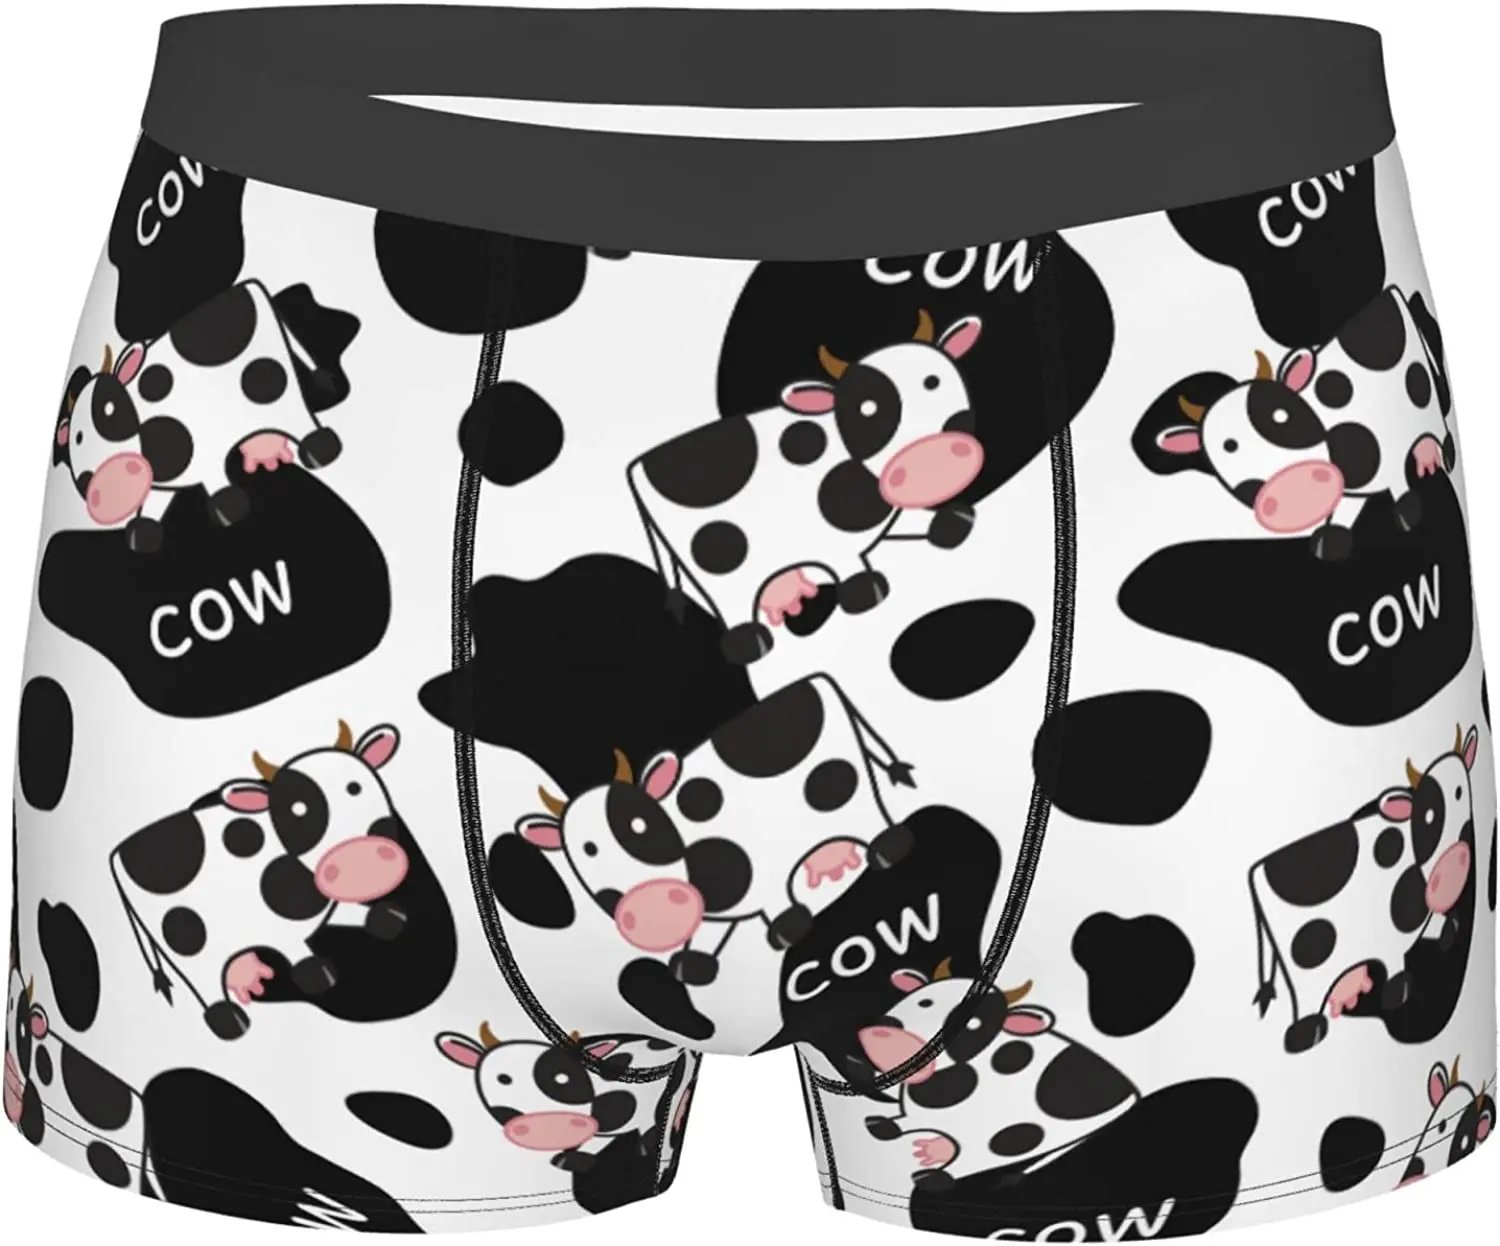 

Men's Breathable Boxer Briefs Cute Cow Print Comfort Soft Stretch Underwear Trunks with Bulge Pouch for Men Boys